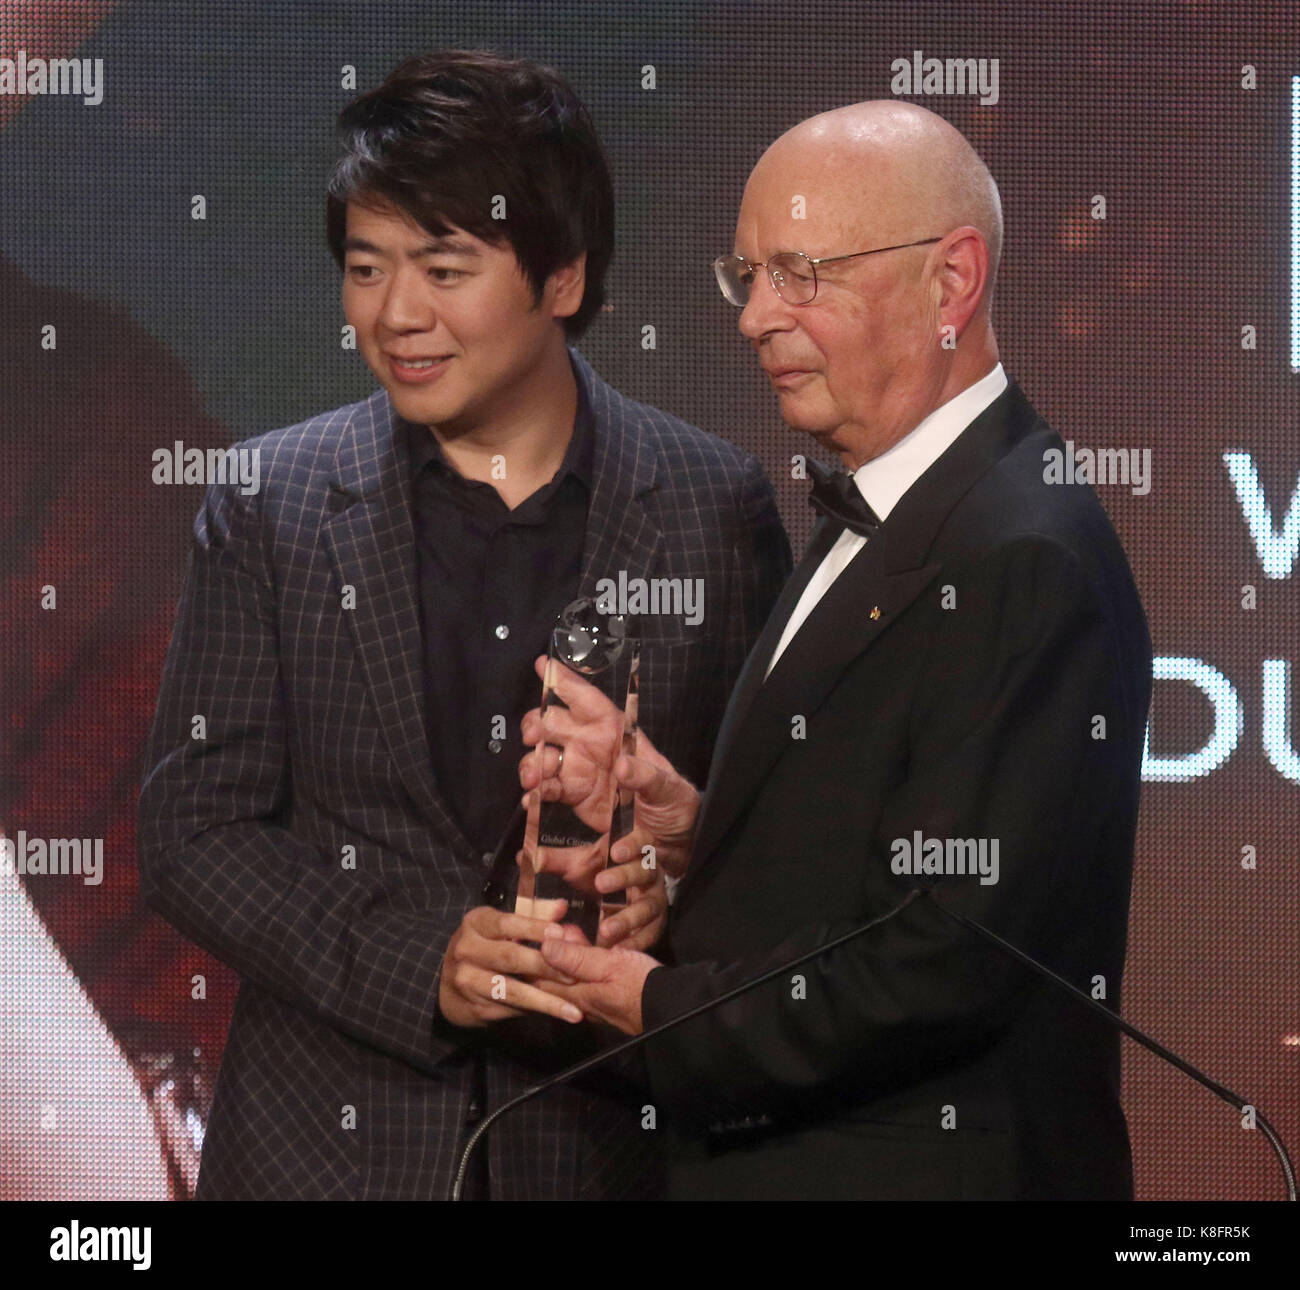 New York, New York, USA. 19th Sep, 2017. Founder and Executive Chairman of the World Economic Forum, presenter KLAUS SCHWAB and award recipient Chinese pianist LANG LANG attend the Atlantic Council 2017 Global Citizen Awards held at the Intrepid Sea, Air, & Space Museum. Credit: Nancy Kaszerman/ZUMA Wire/Alamy Live News Stock Photo